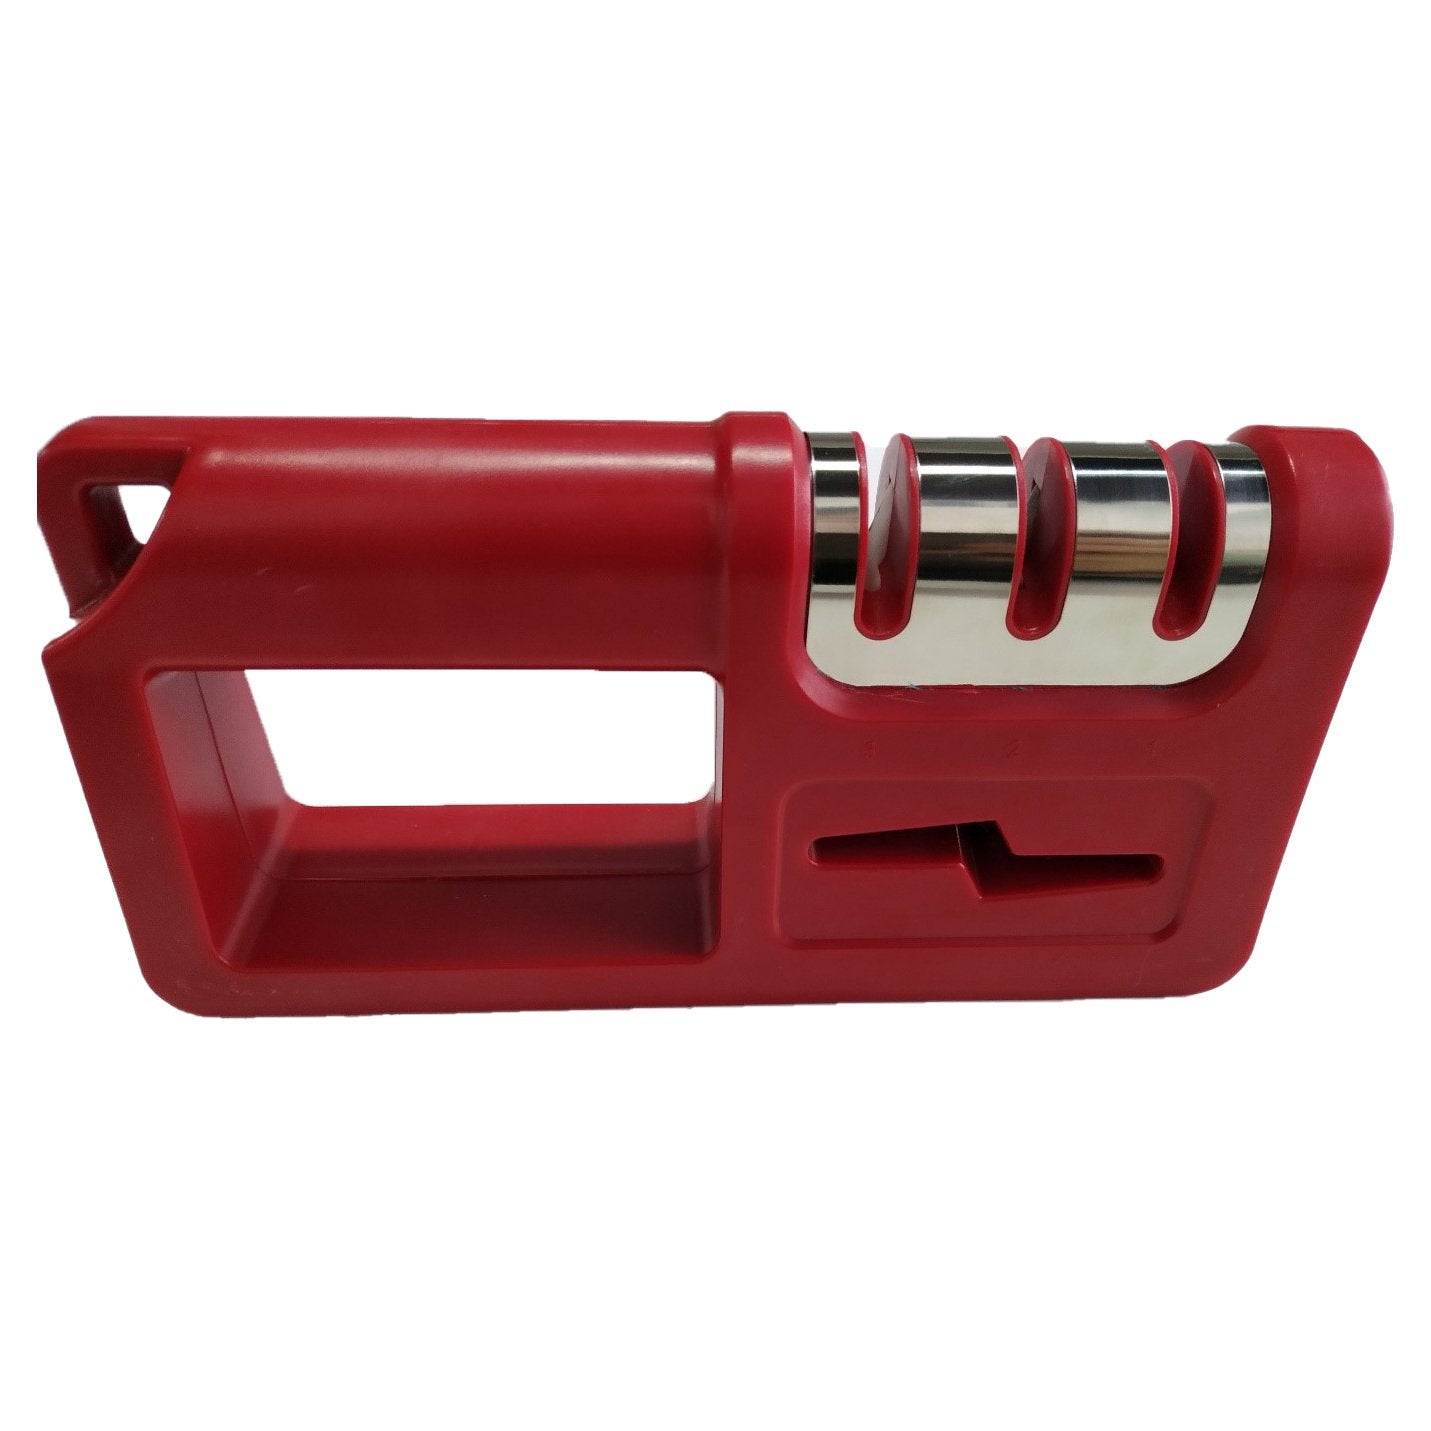 Deluxe Carving Set and Knife Sharpener